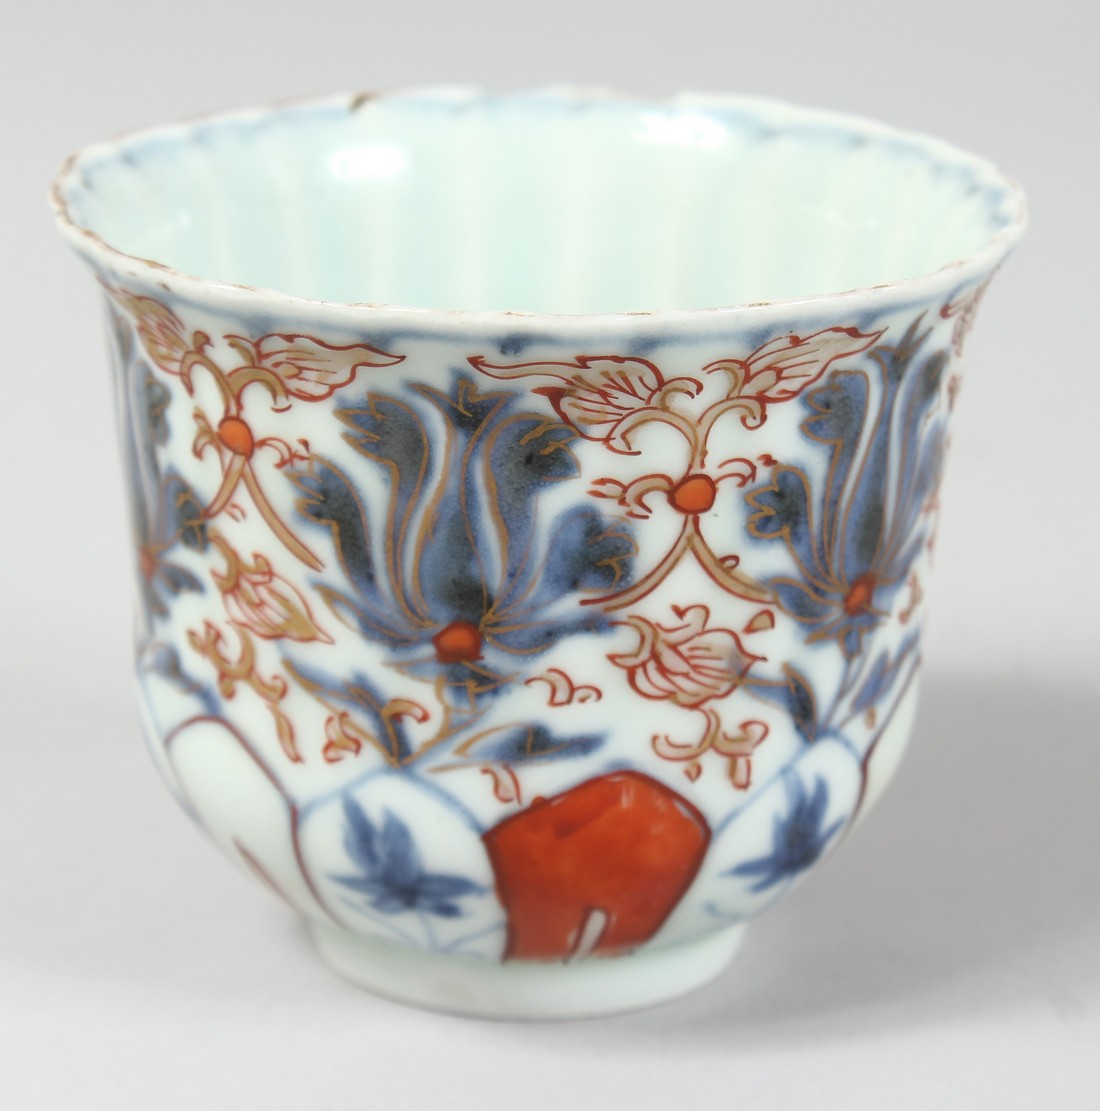 AN 18TH CENTURY JAPANESE IMARI PORCELAIN CUP, the interior of ribbed form, with floral motifs